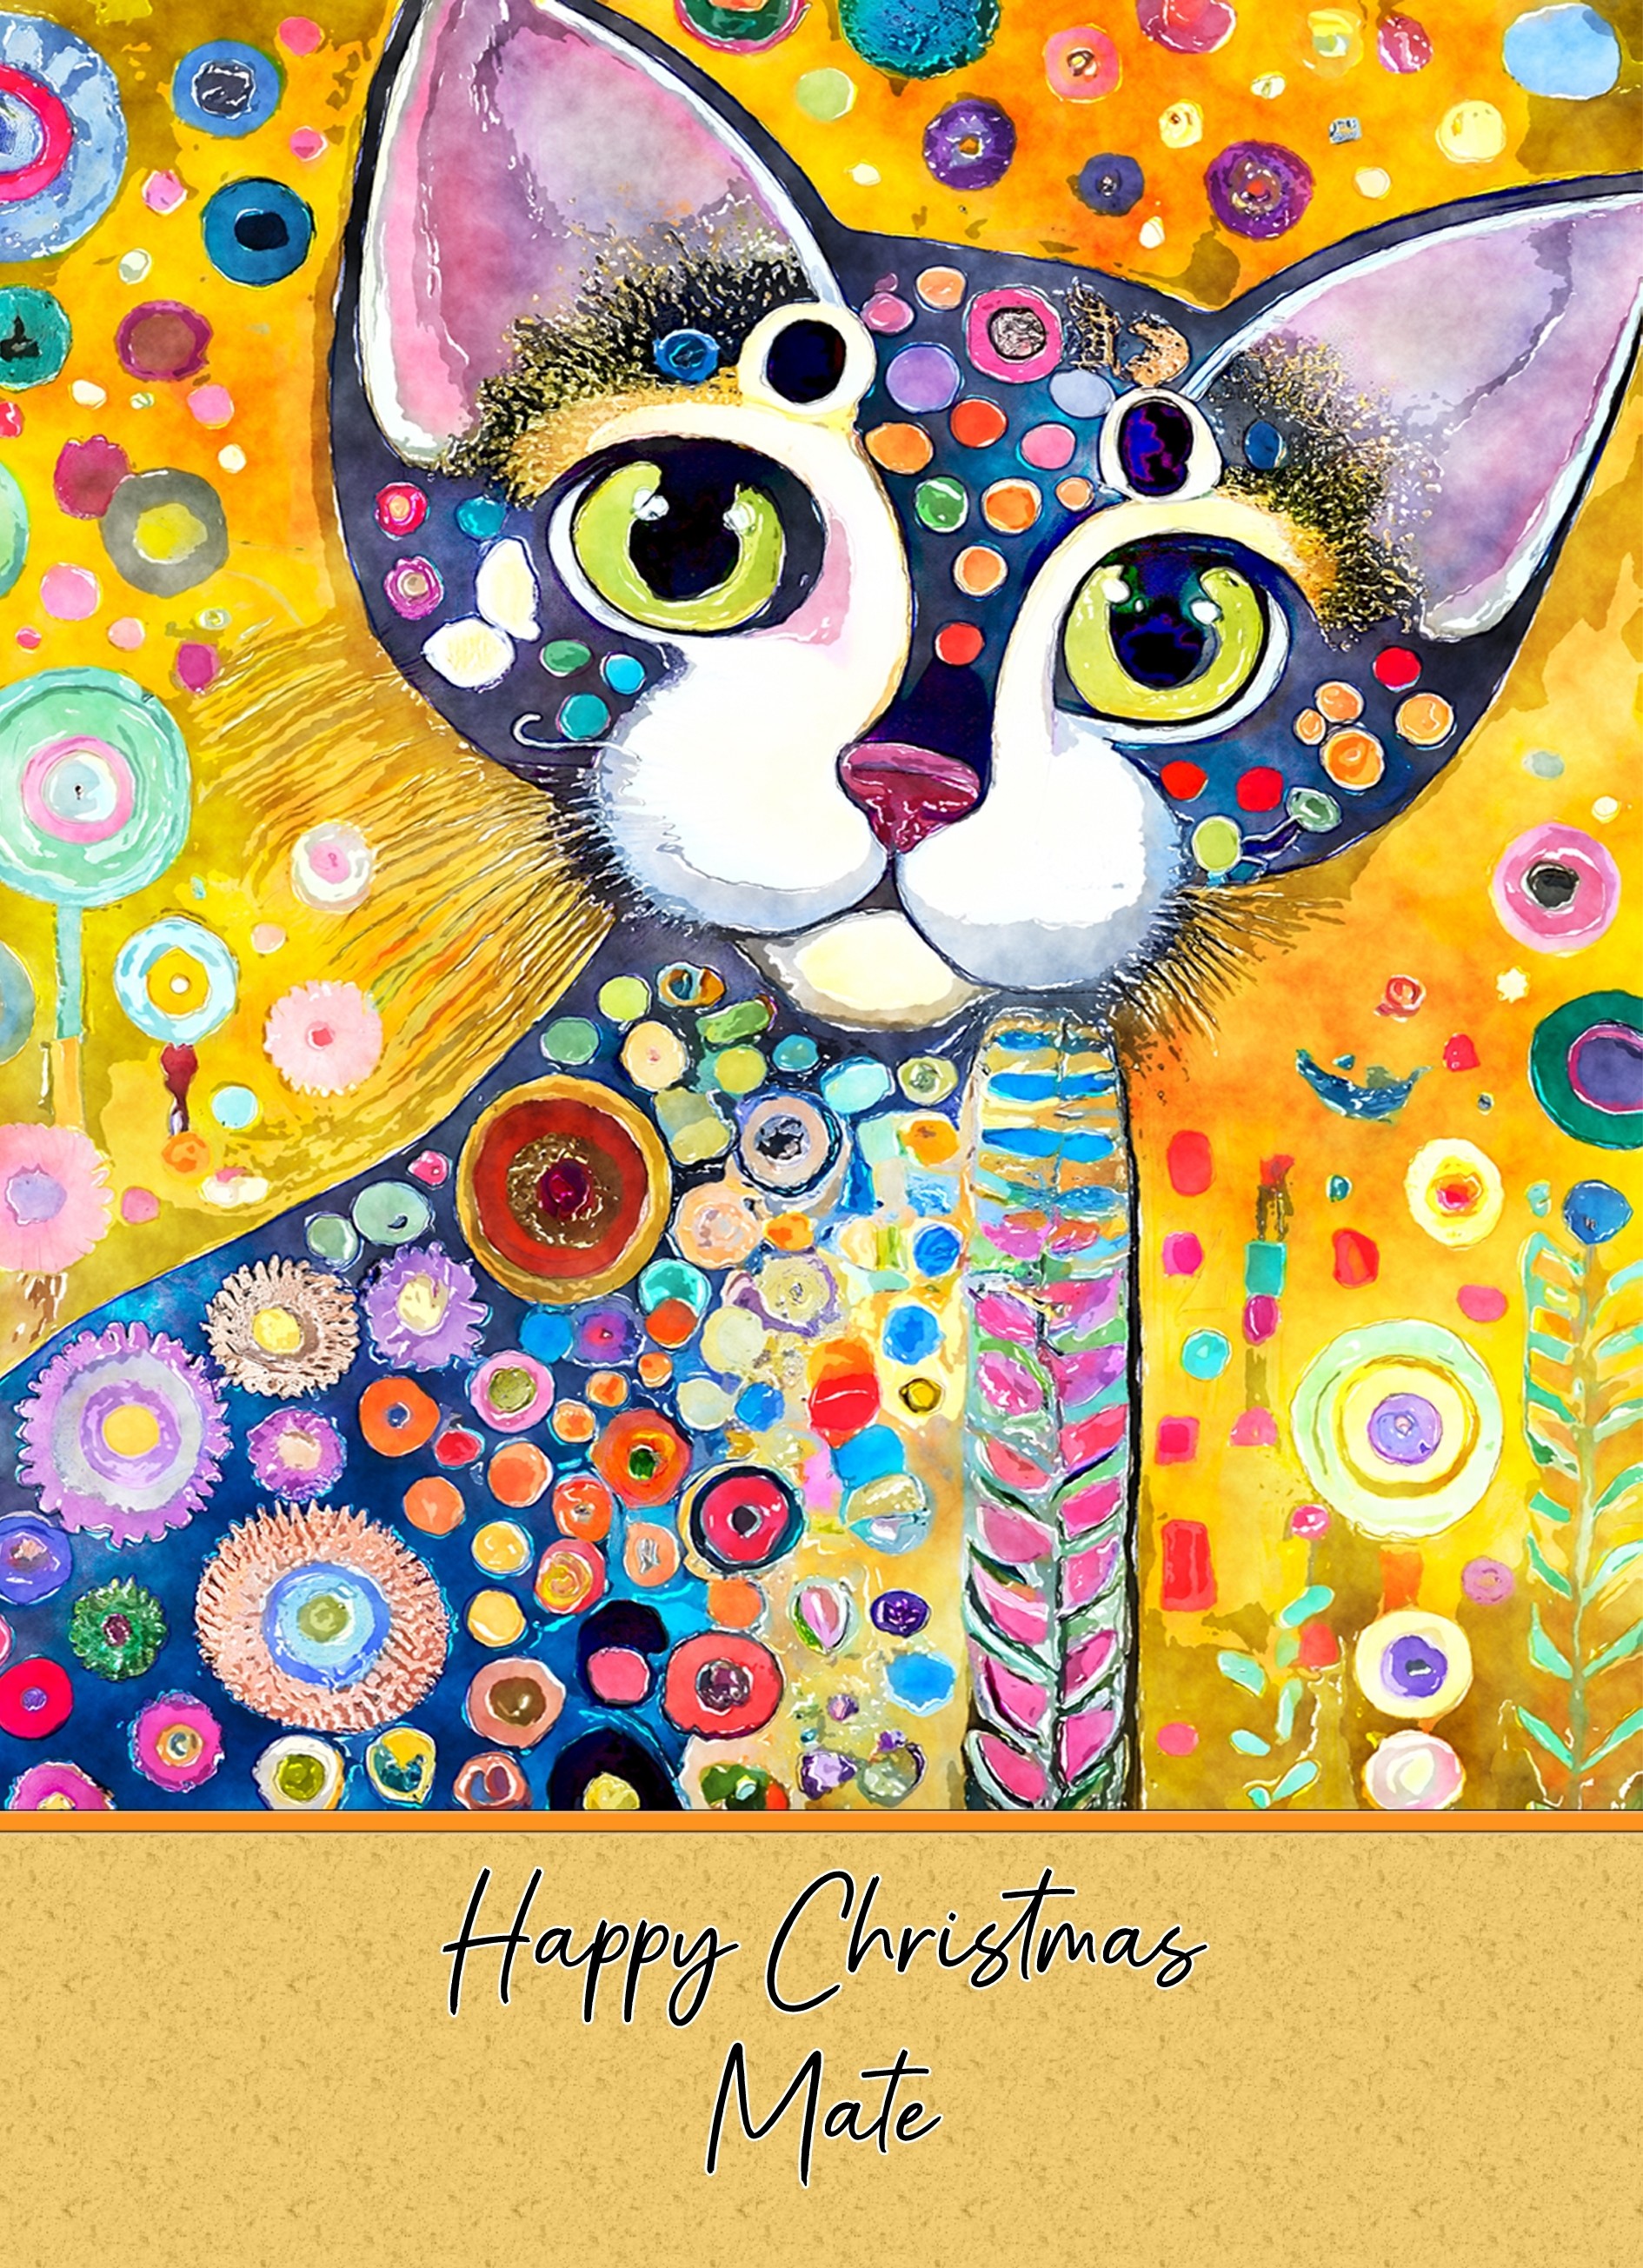 Christmas Card For Mate (Cat Art Painting, Design 2)